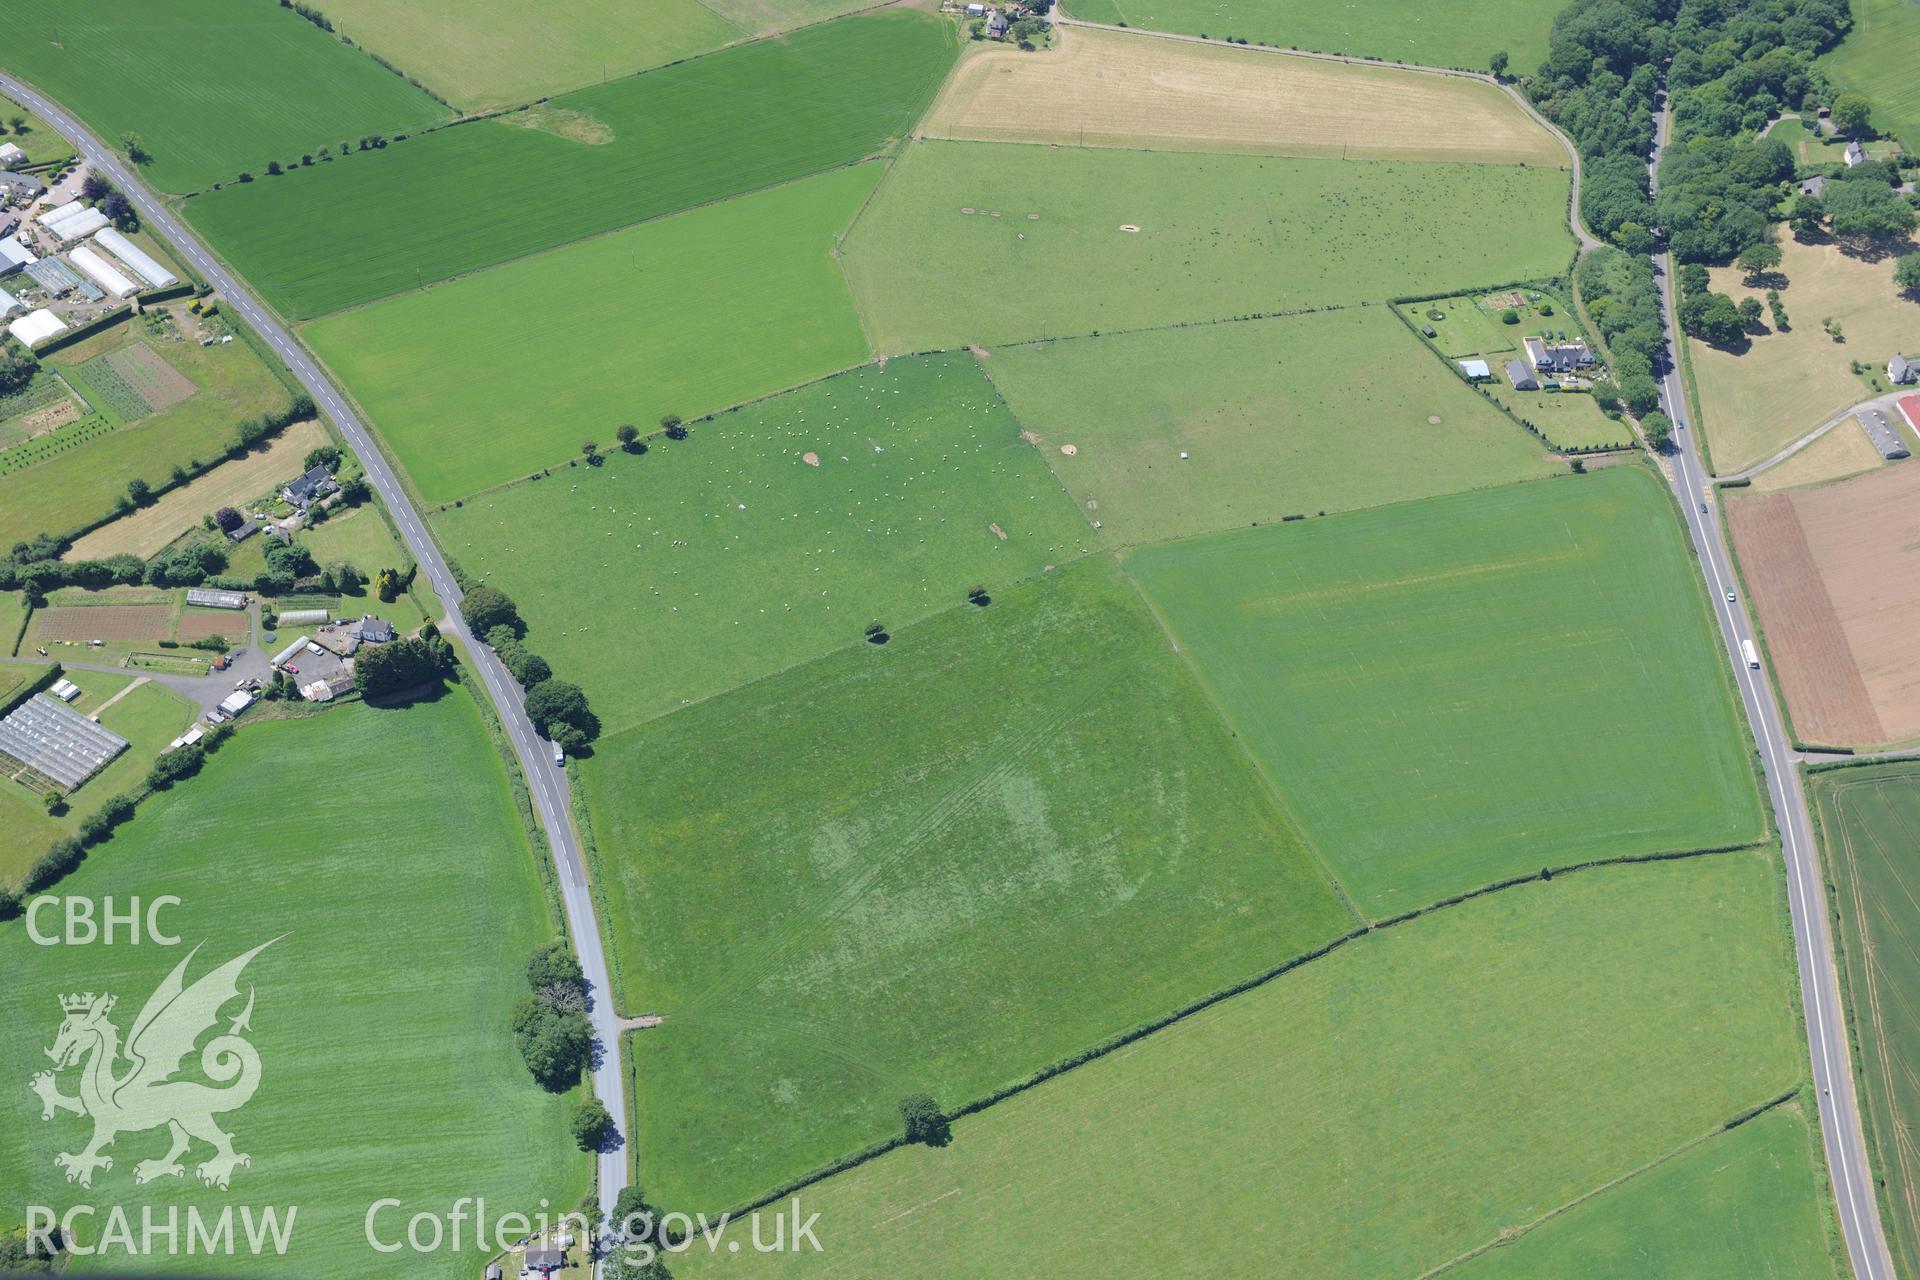 Killcrow Hill Roman Marching Camp, between Chepstow and Newport. Oblique aerial photograph taken during the Royal Commission's programme of archaeological aerial reconnaissance by Toby Driver on 29th June 2015